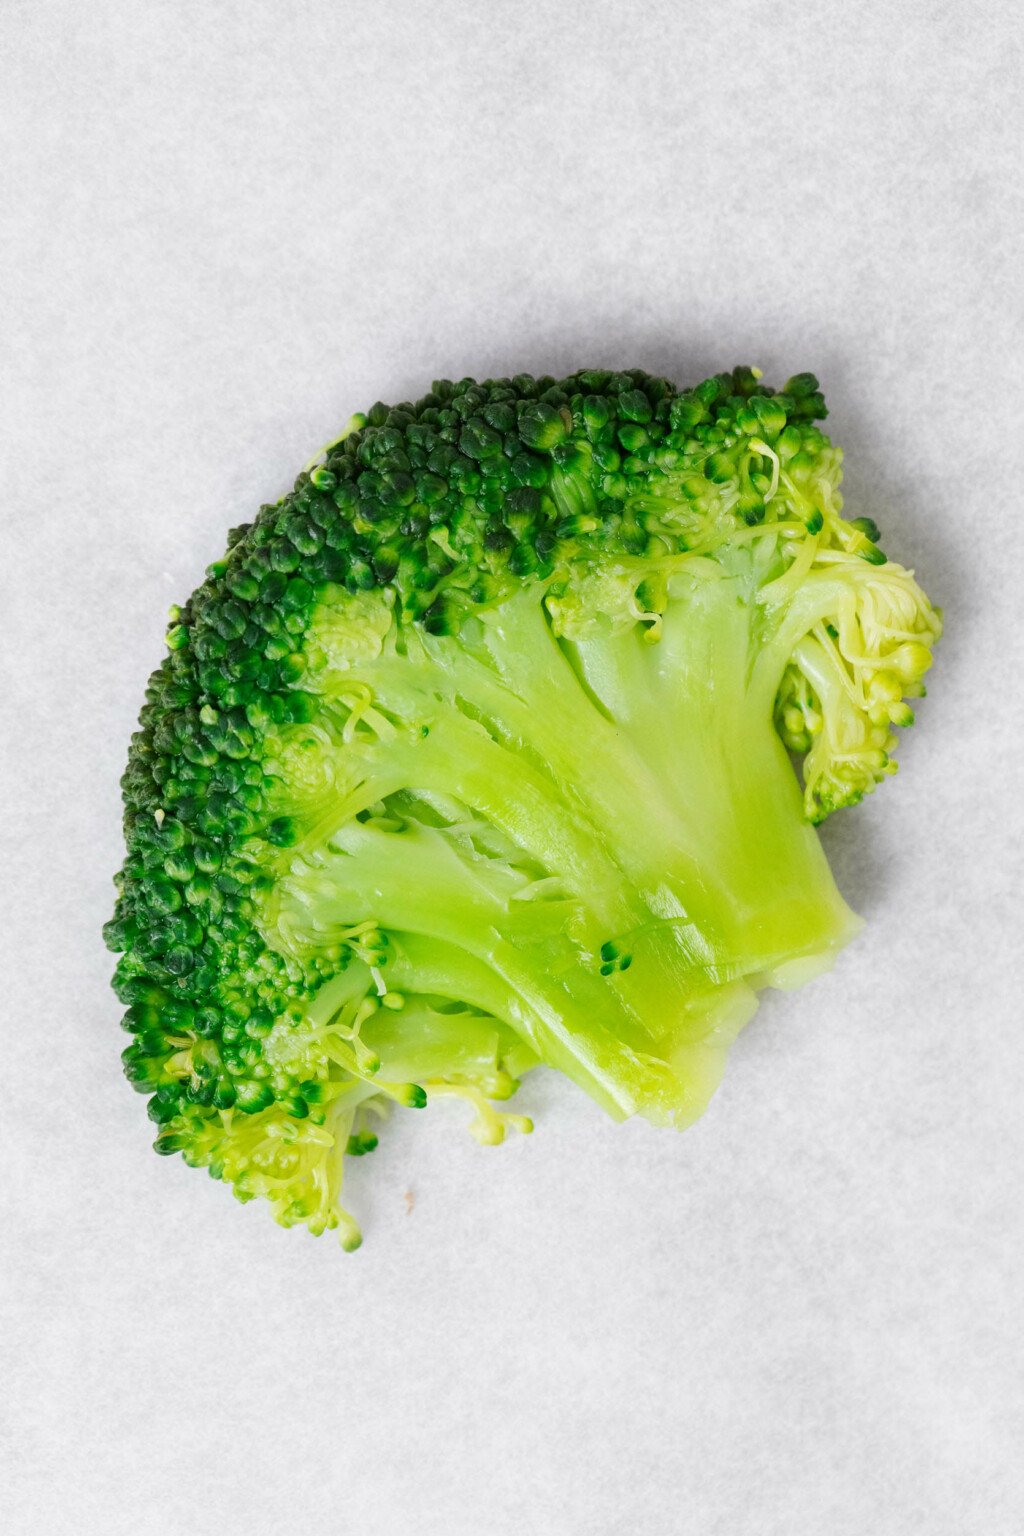 An overhead image of a flattened, bright green broccoli floret on a sheet of parchment paper.